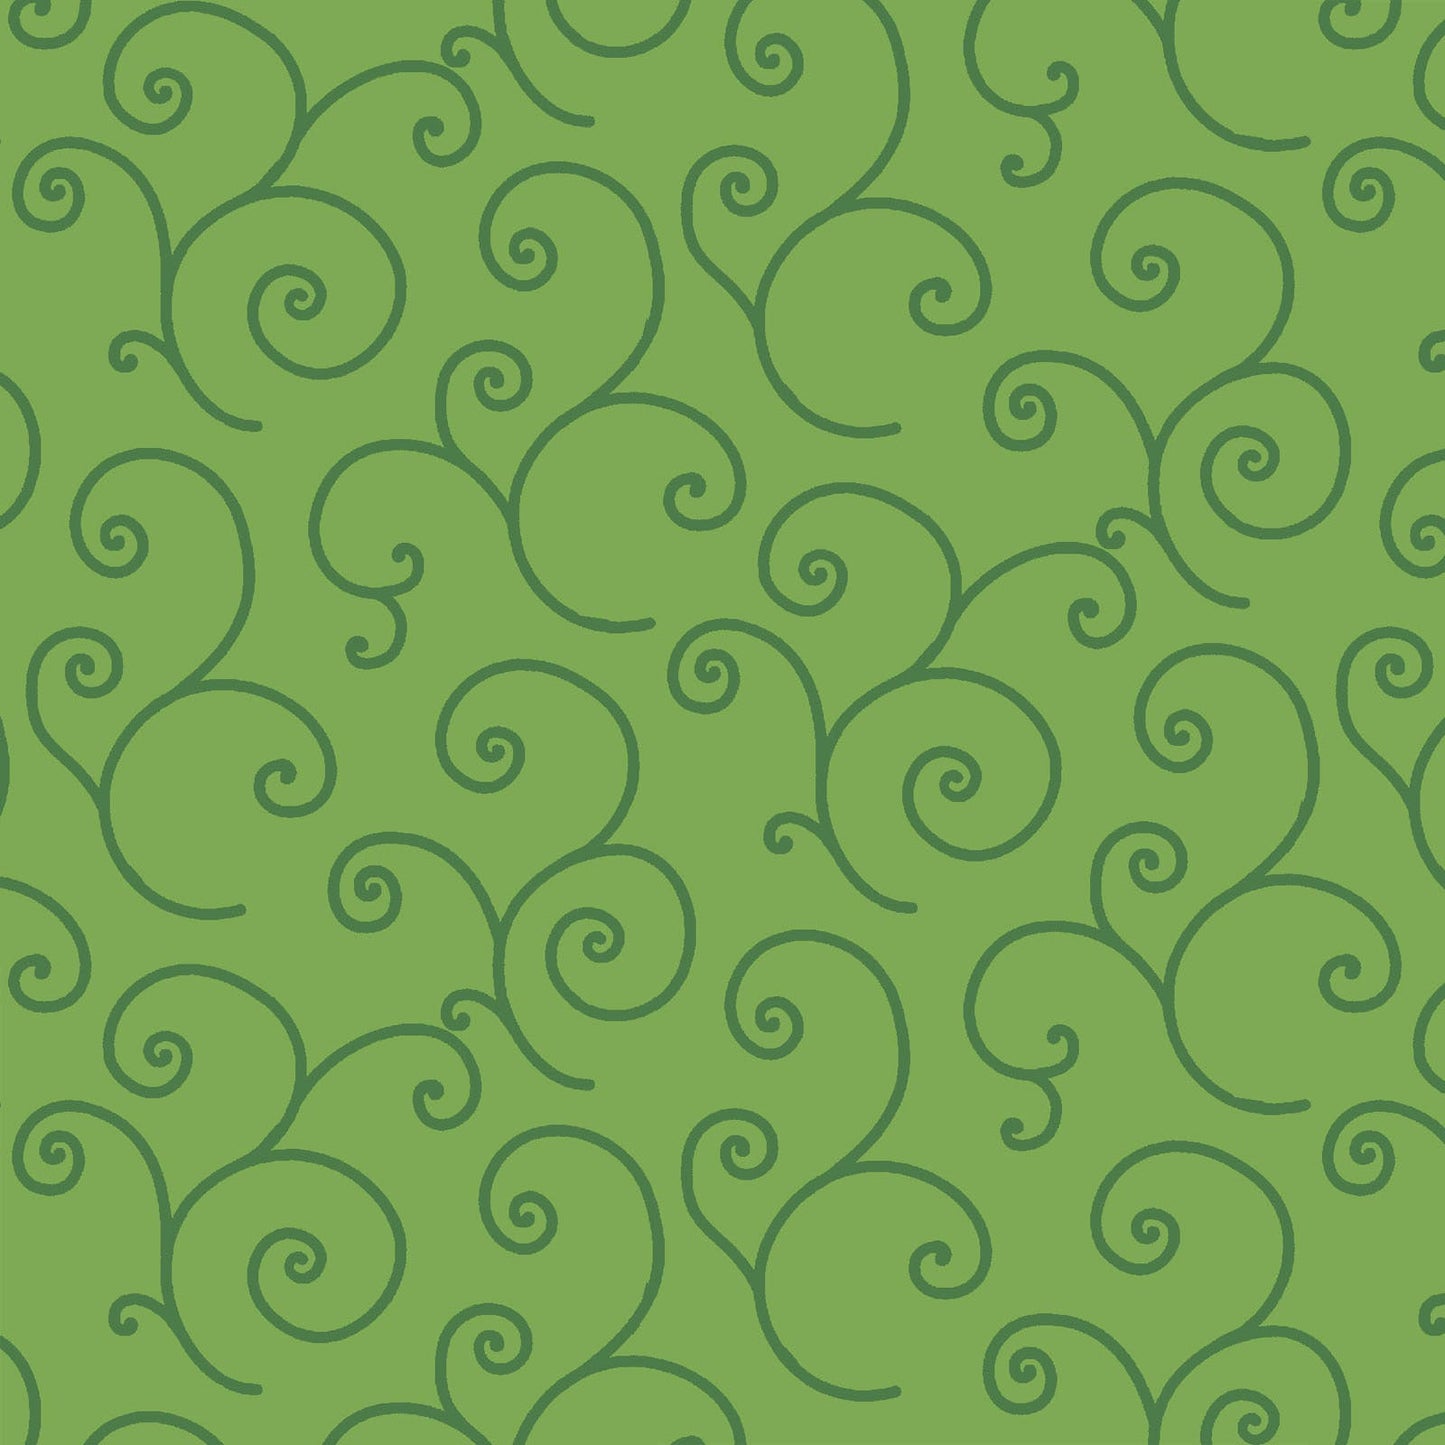 Scroll White on White (MAS8243-GG) is part of the Kimberbell Basics line designed by Kim Christopherson for Maywood Studio. This fabric features green tone on tone scroll, adding a whimsical touch that isn't overpowering in projects.